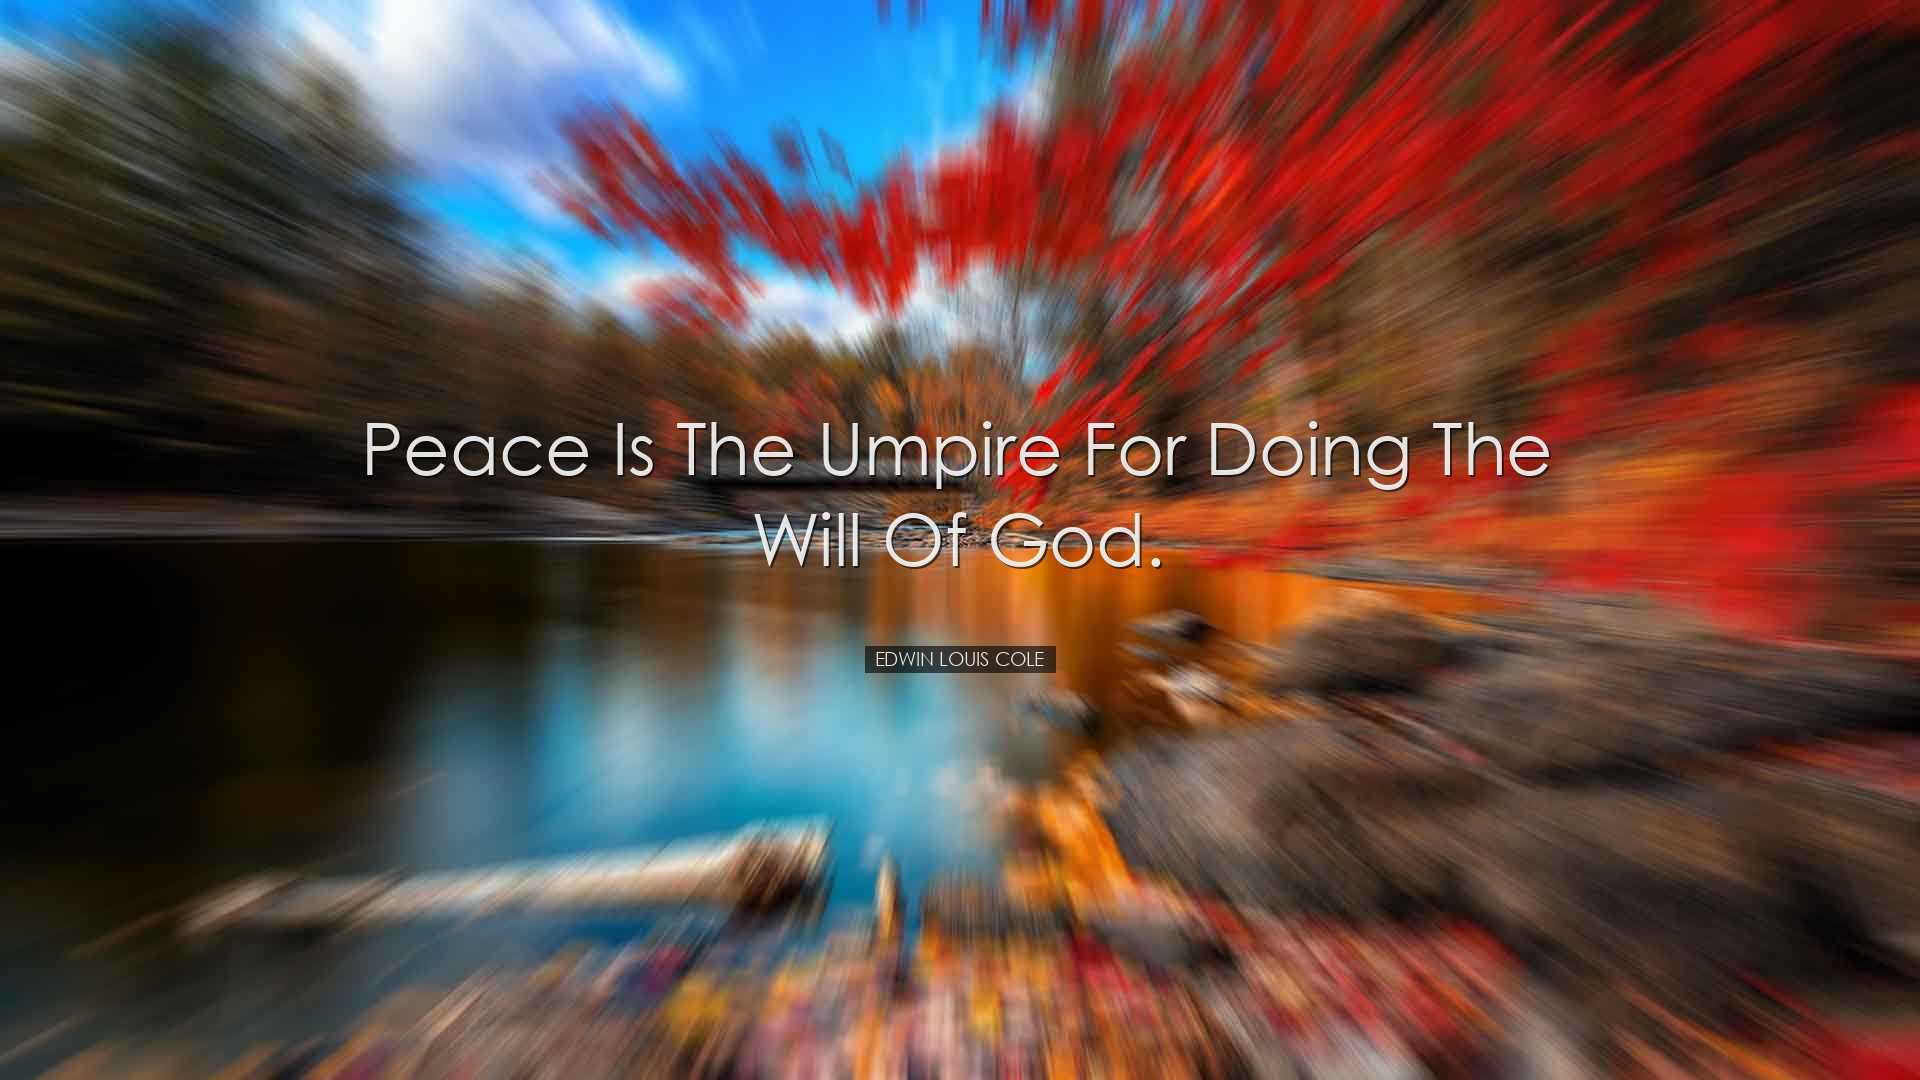 Peace is the umpire for doing the will of God. - Edwin Louis Cole